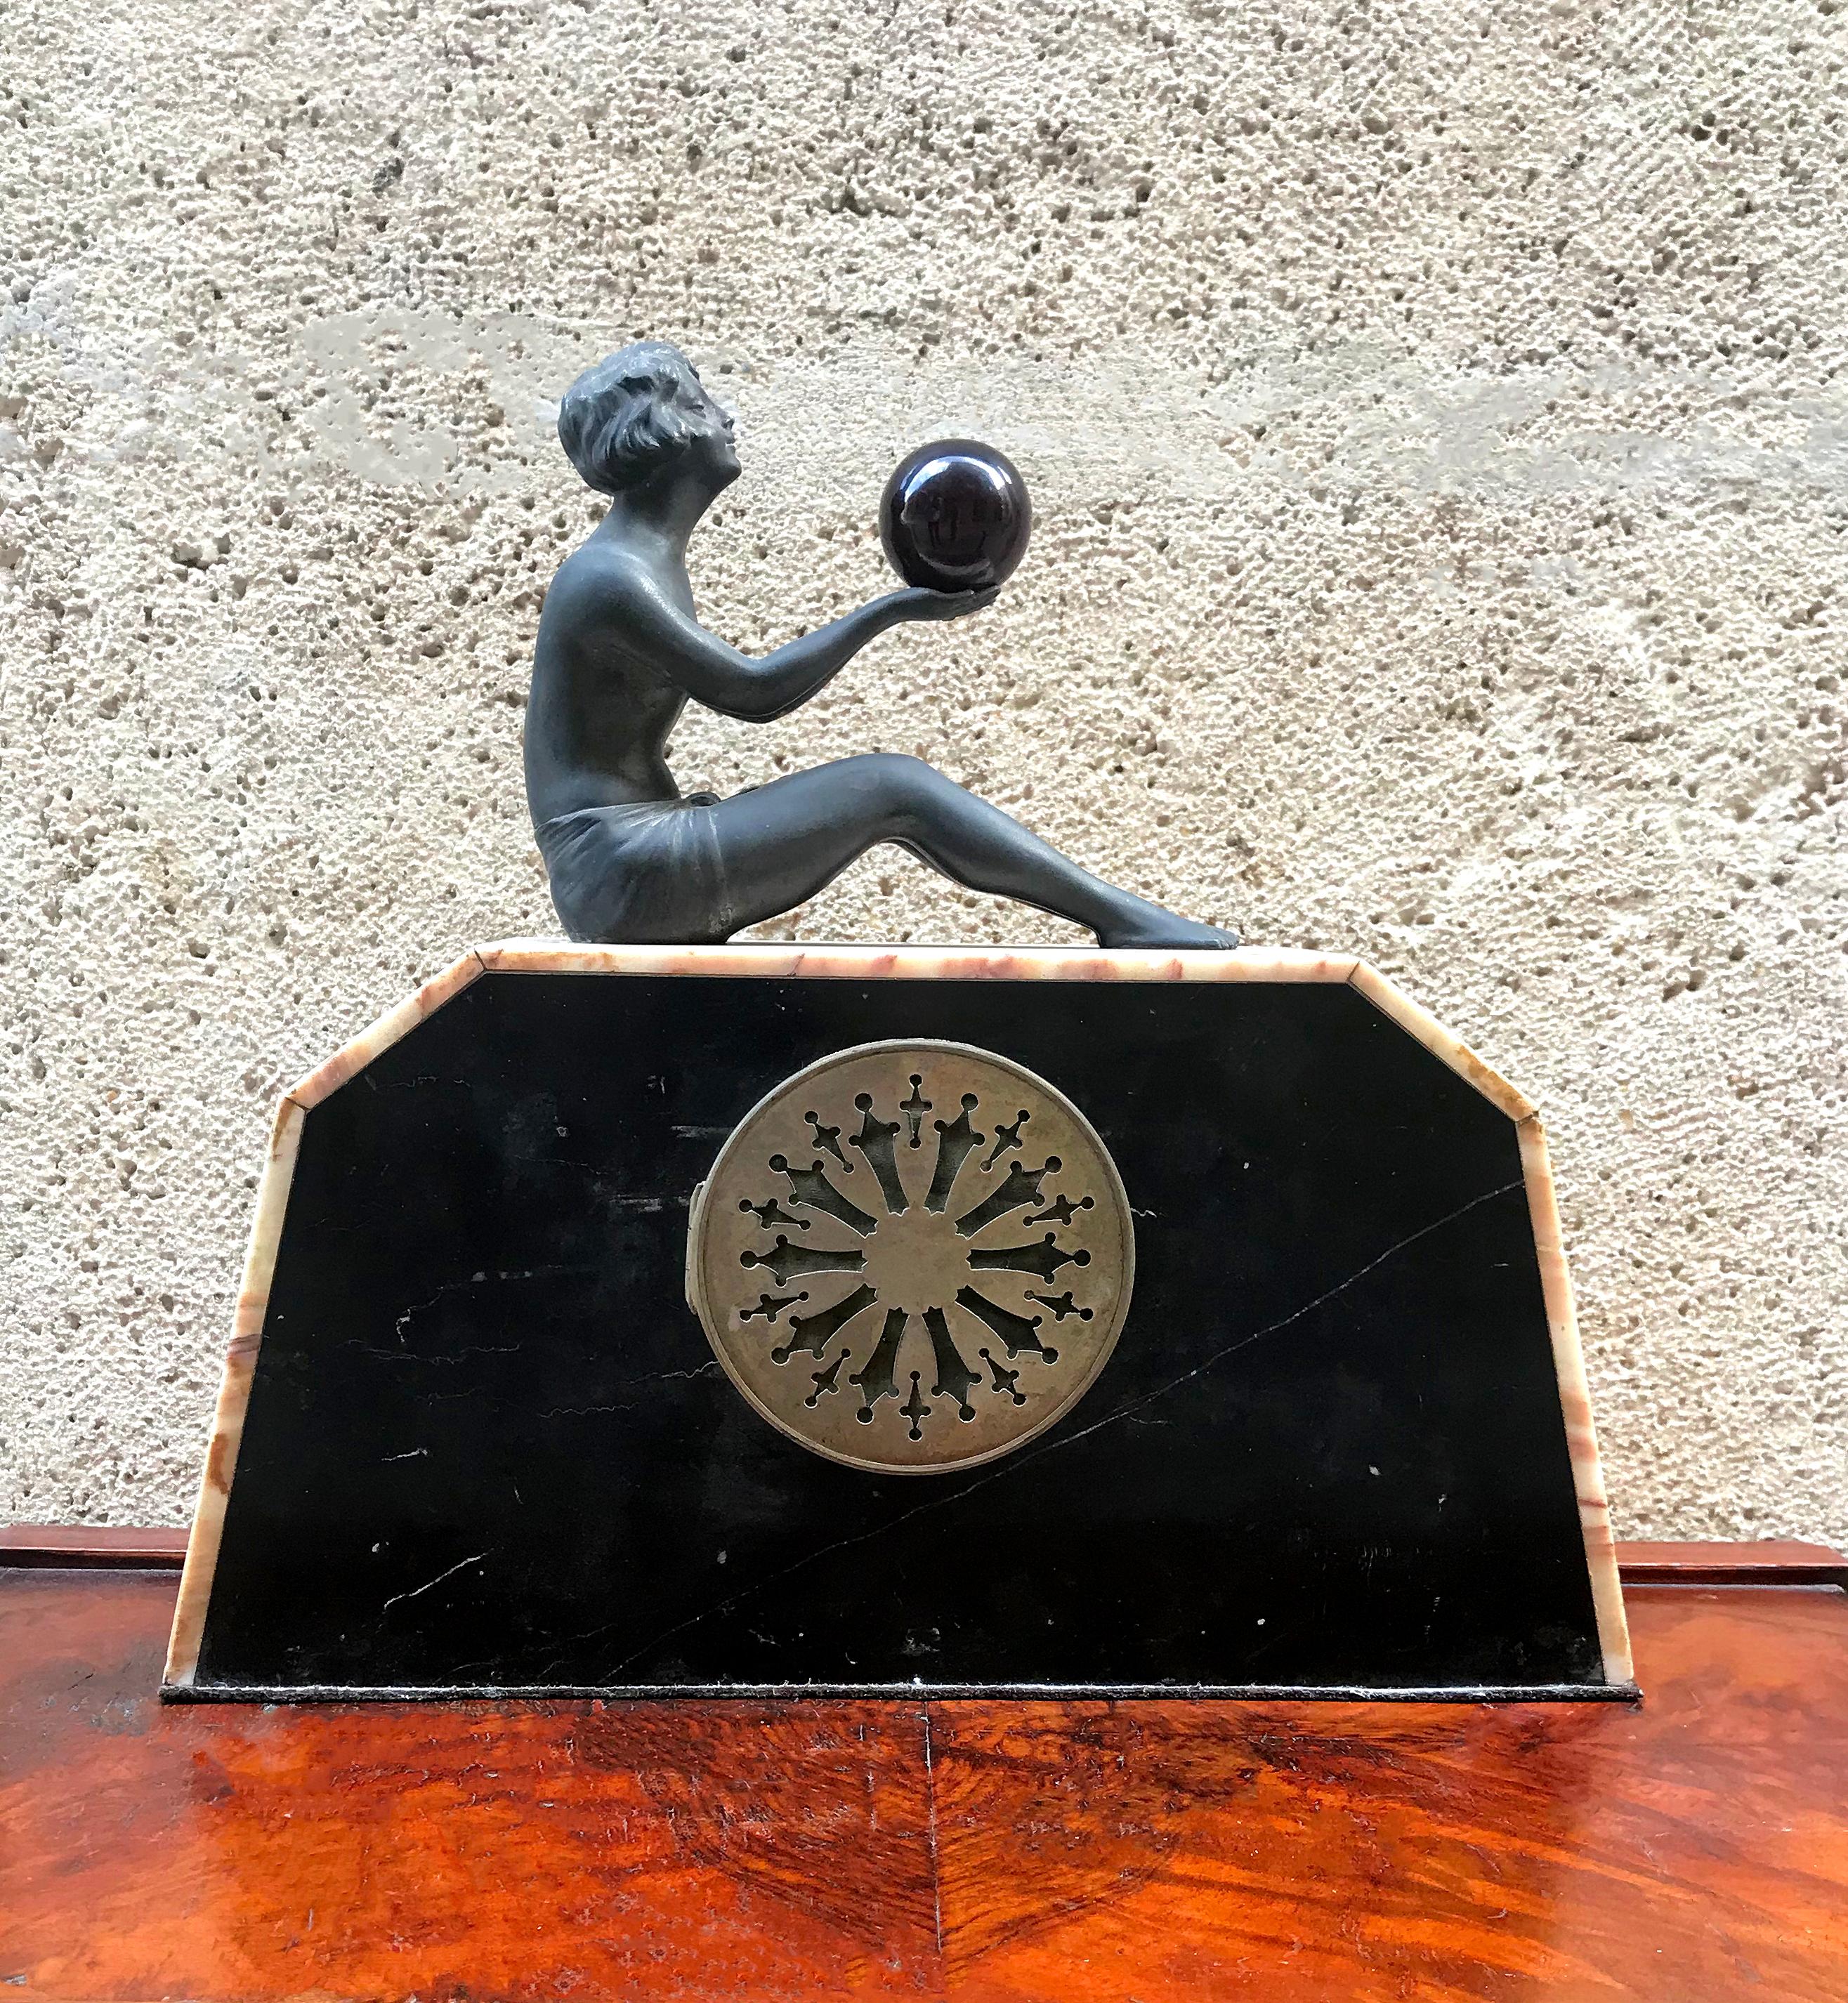 French table clock, Art Deco style, made circa the 1920s in marble with a sculpture of a semi-nude woman made of calamine.
It is a design by Pronost Freres.
This watch is in perfect condition and fully operational.
Ideal to decorate the living